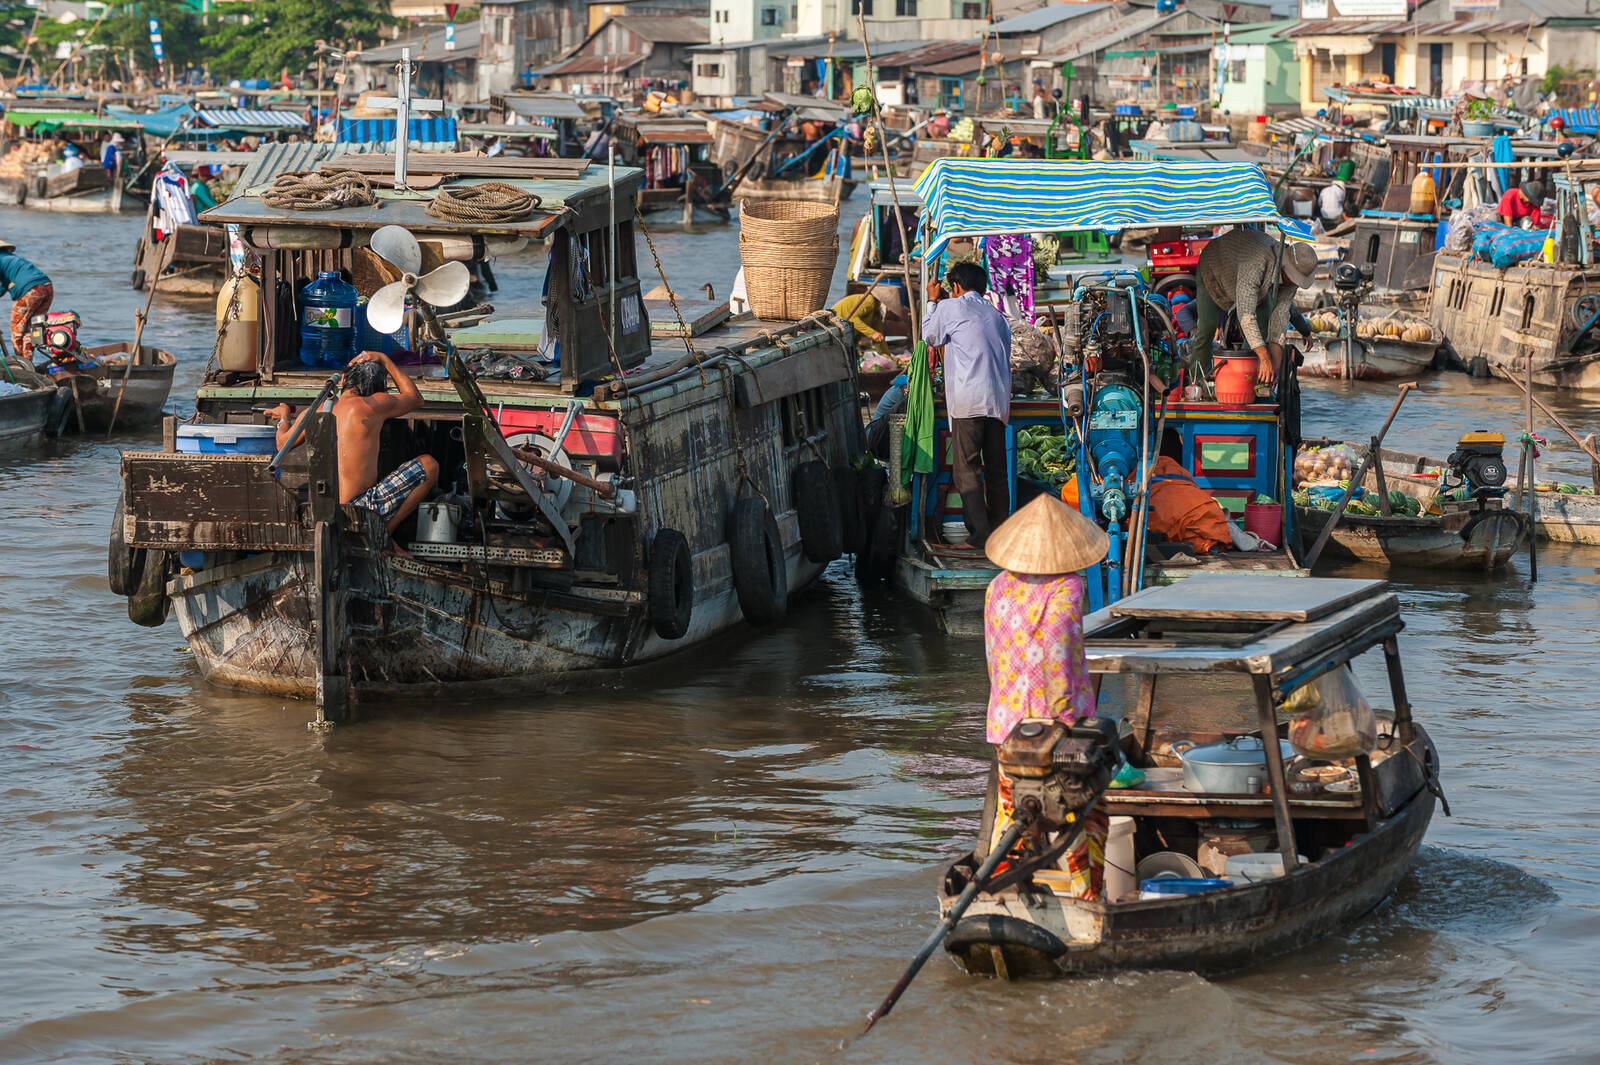 Image of Cai Rang Floating Market by Sue Wolfe